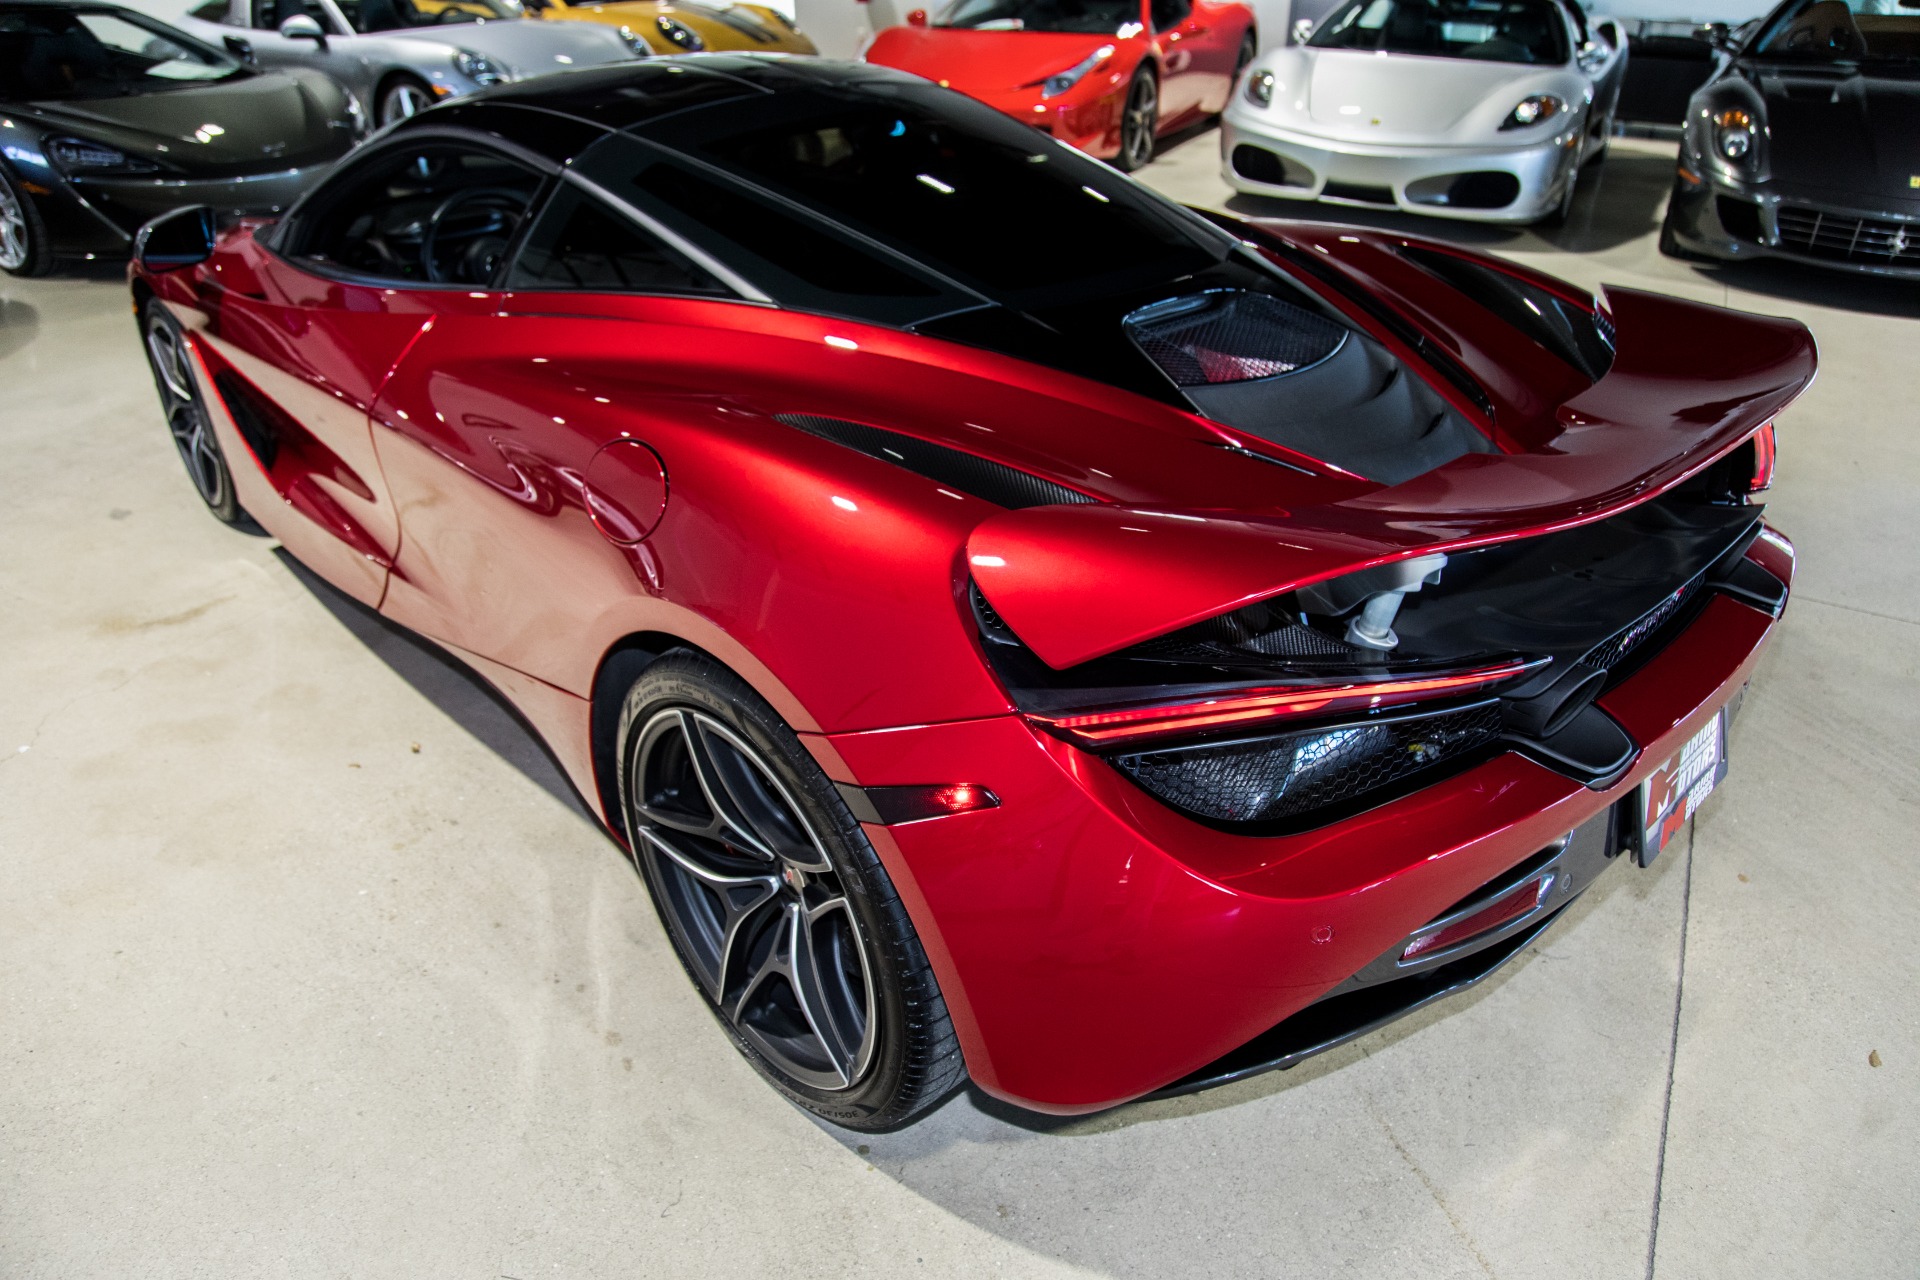 Used 2018 McLaren 720S Performance For Sale ($229,000)